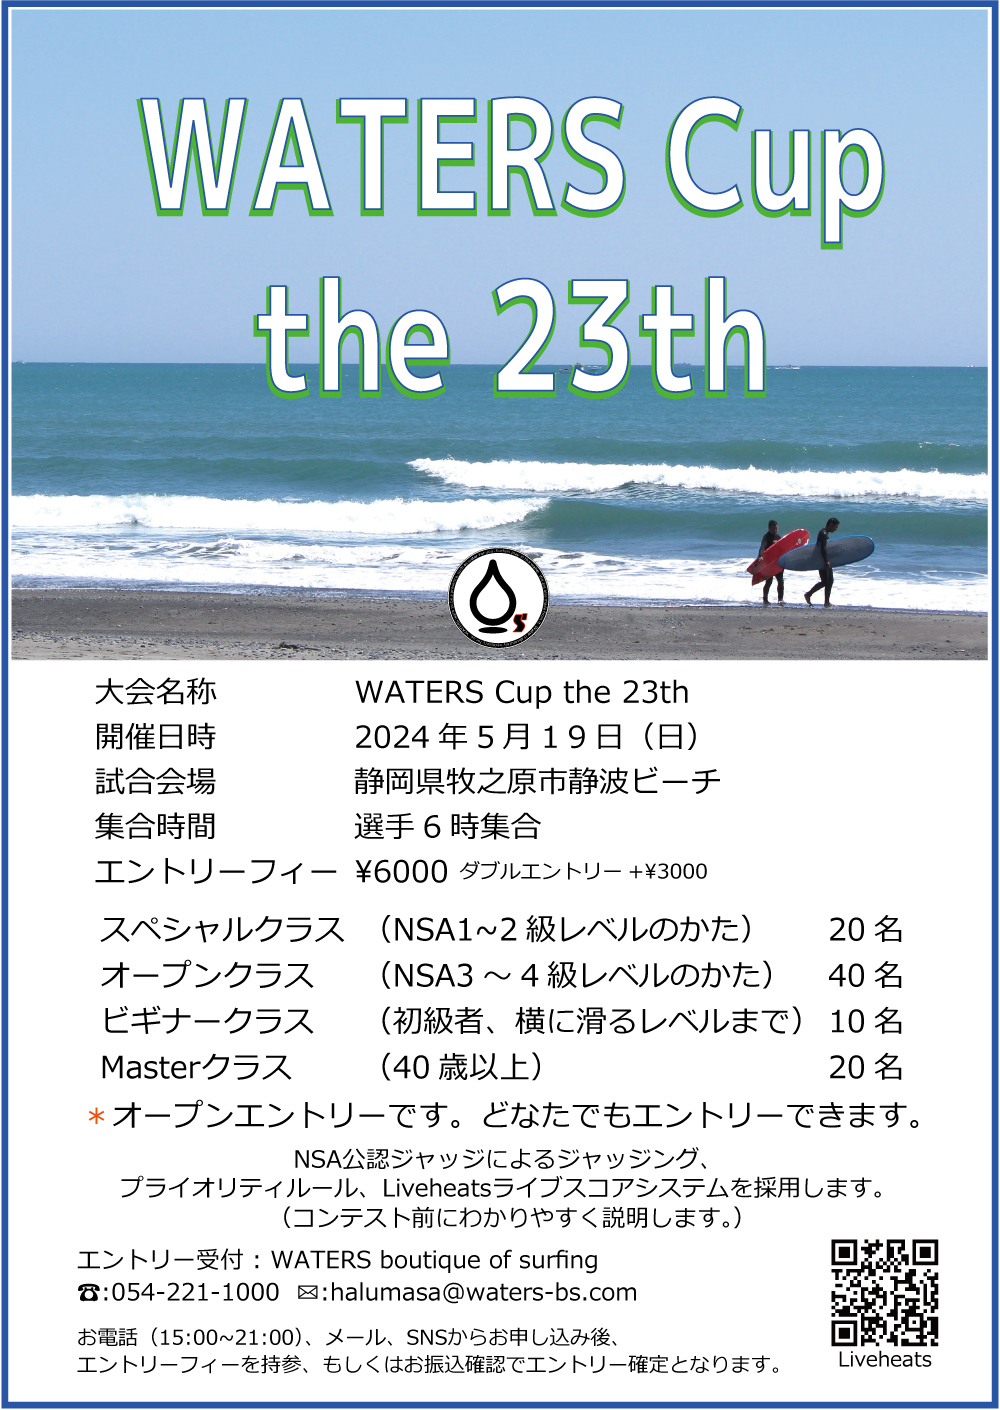 WATERS Cup the 23th、5/19にプライオリティルール+ライブスコアで開催